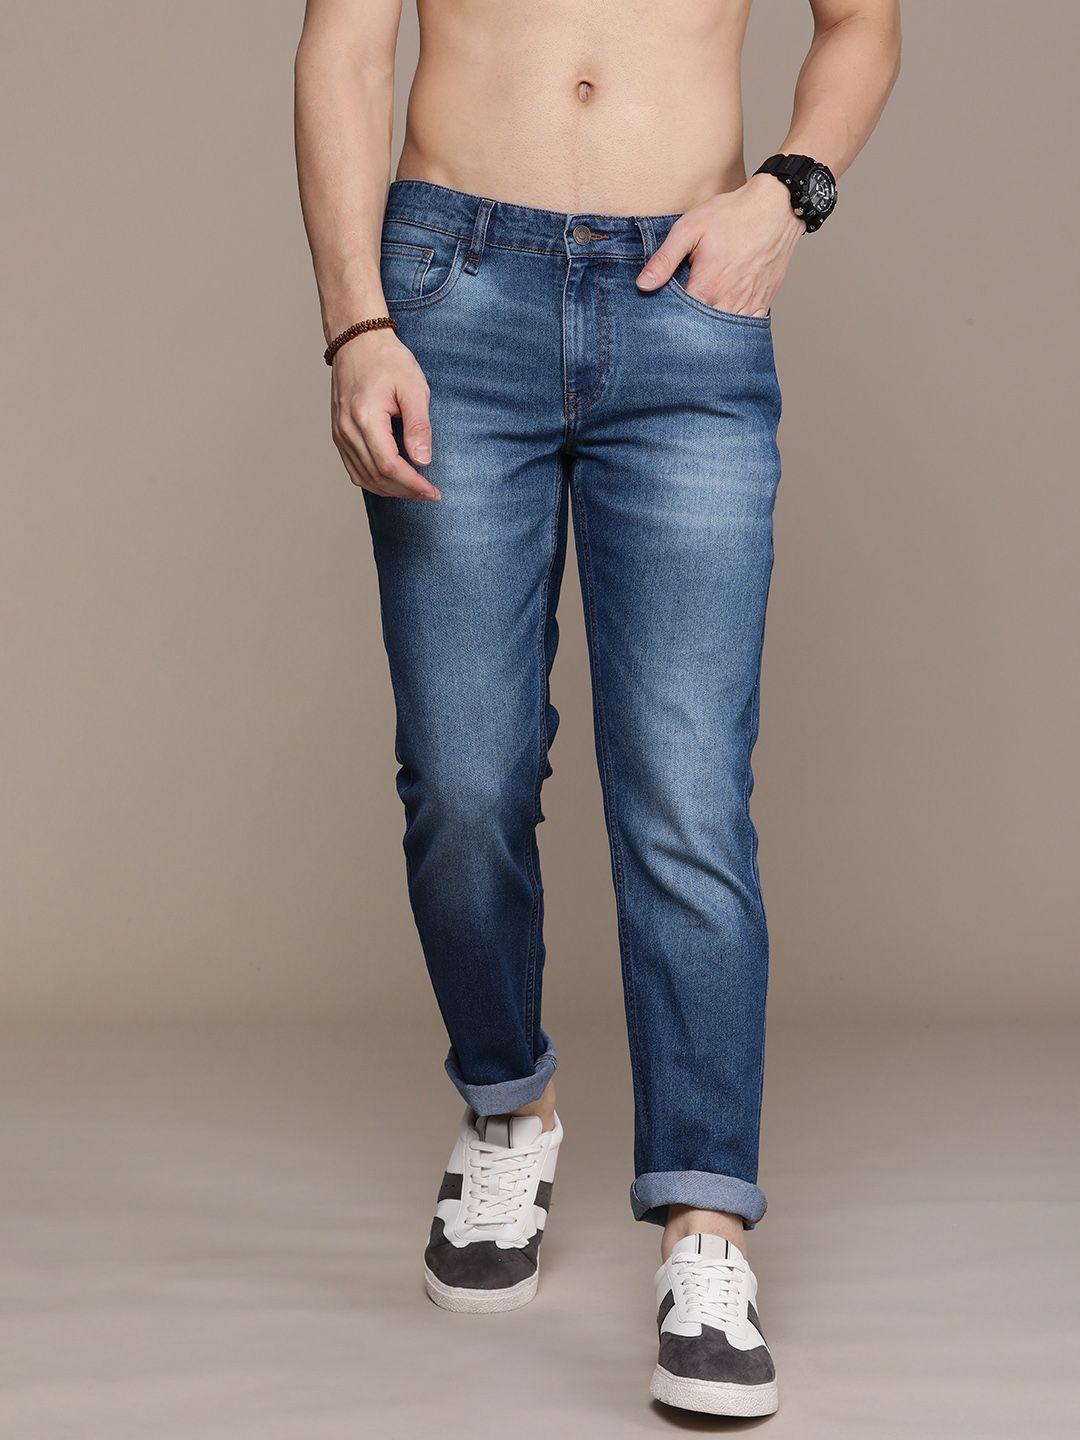 Roadster Men Slim Fit Heavy Fade Stretchable Jeans